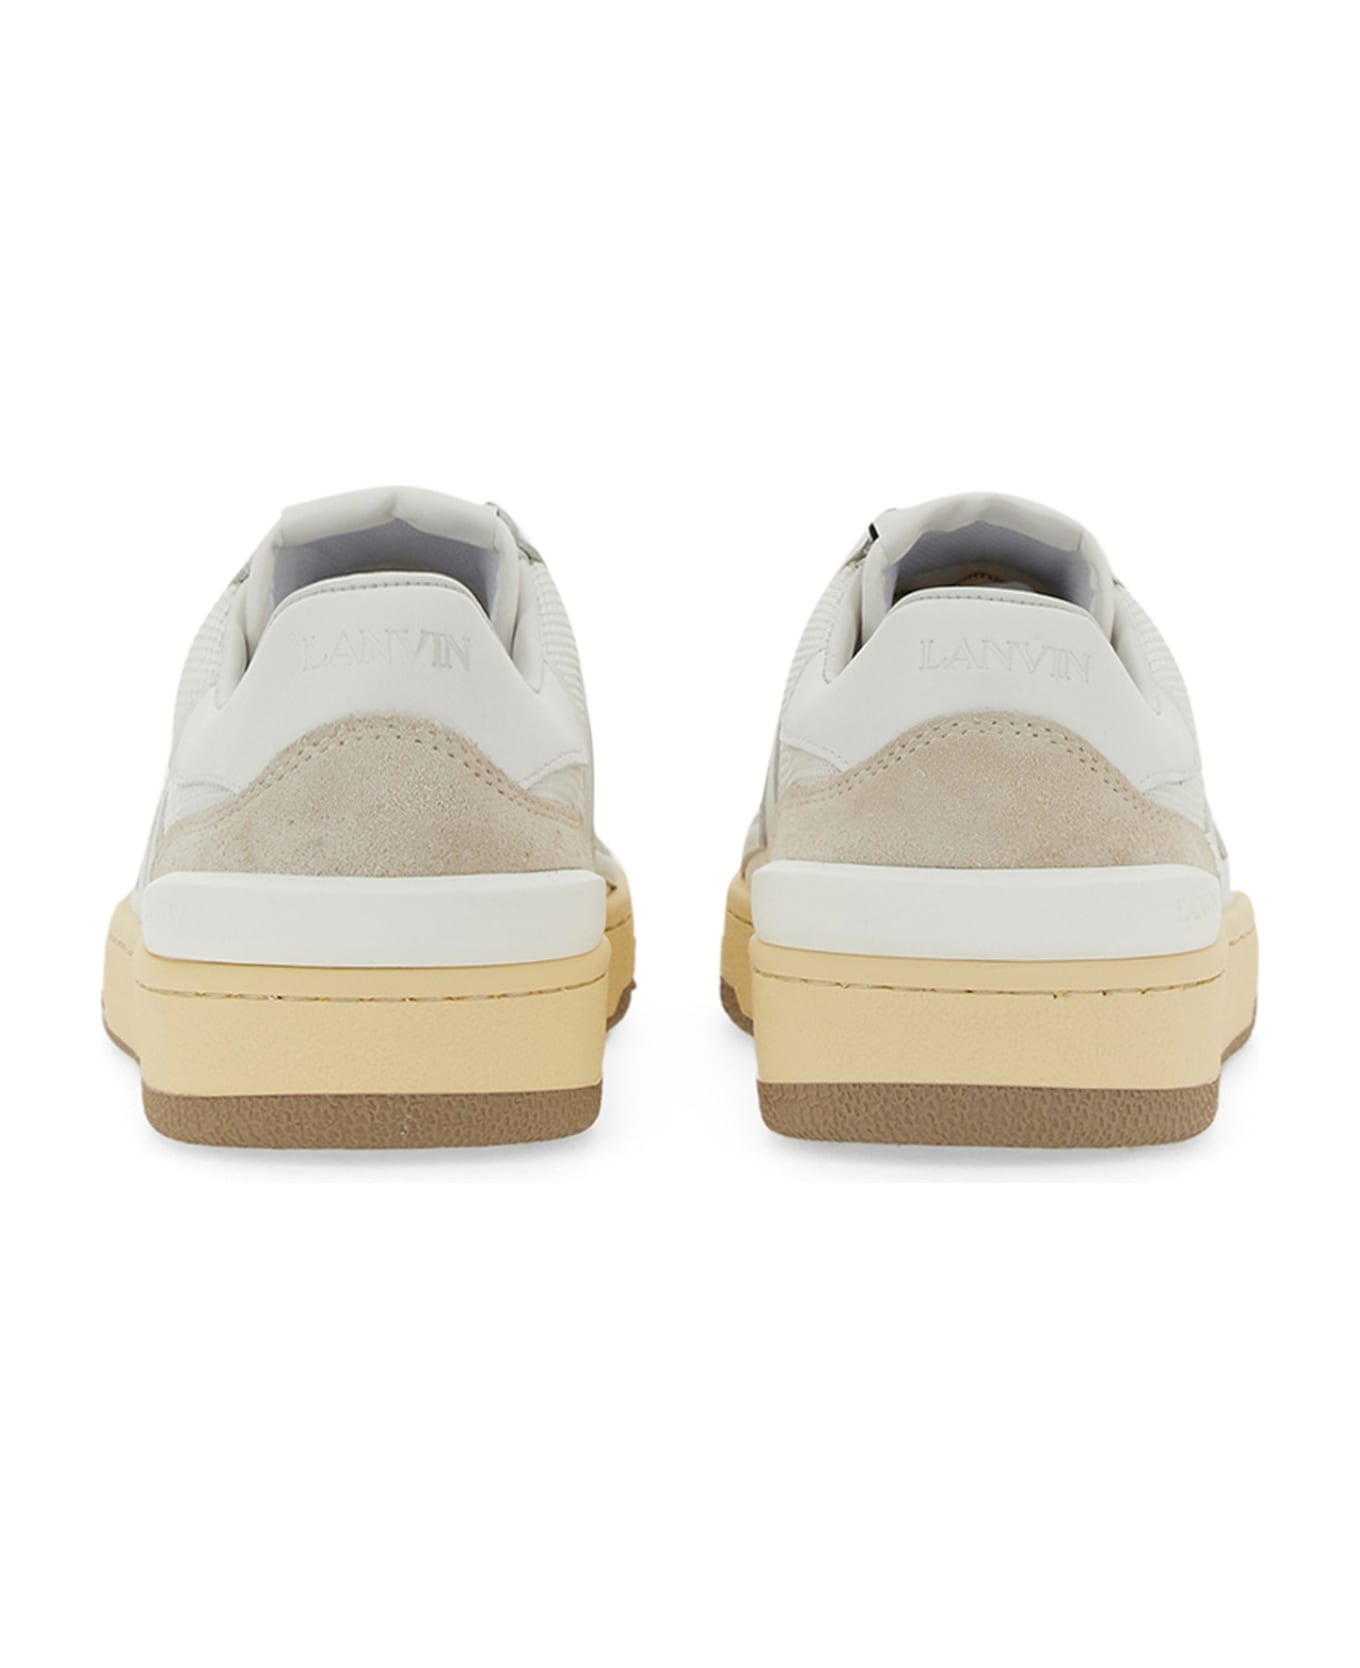 Lanvin Mesh, Suede And Nappa Leather Sneaker - White スニーカー